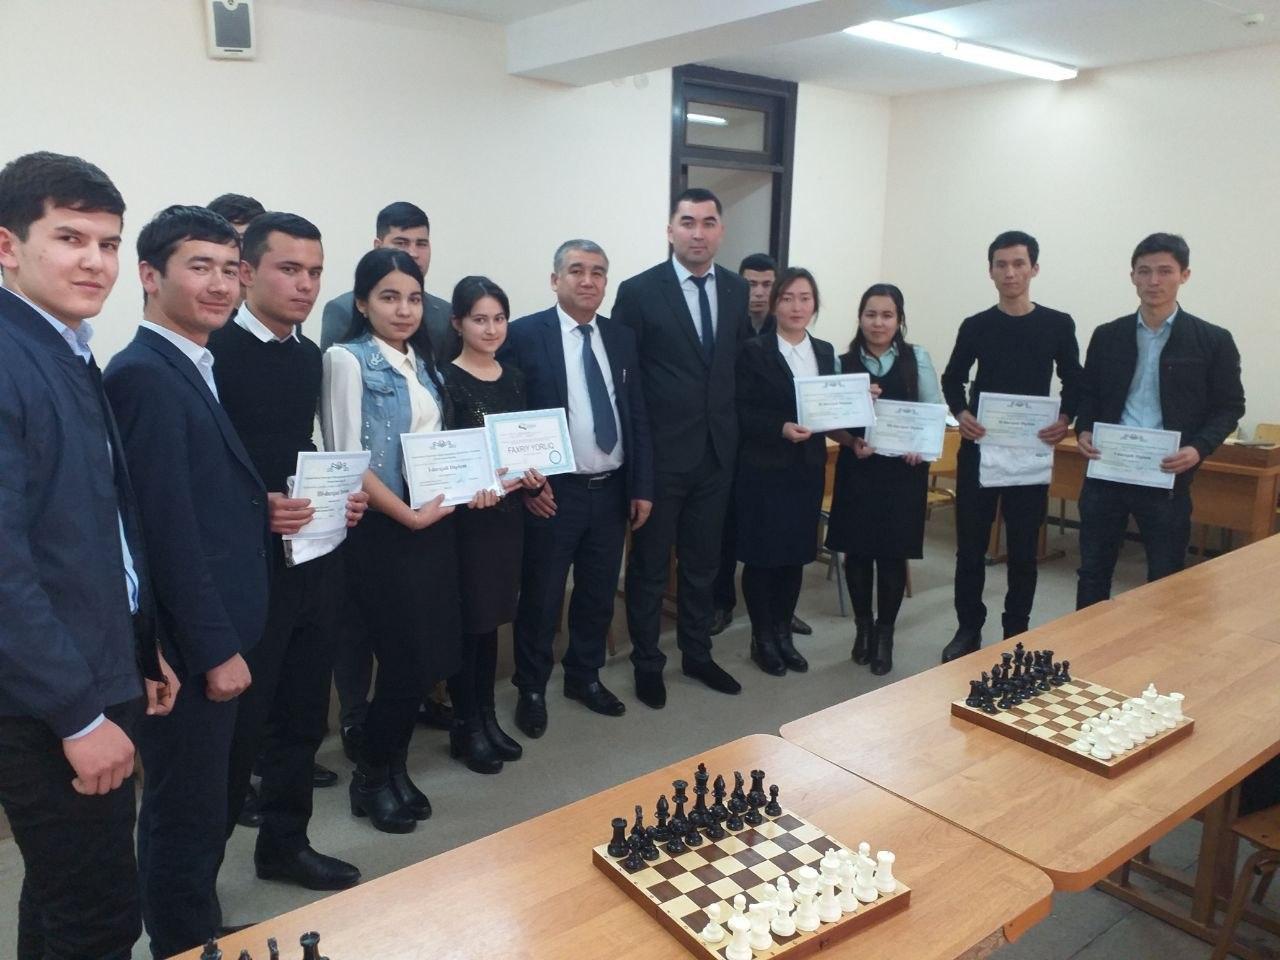 The Faculty of Physics and Mathematics became the winner in chess on the monthly event called 